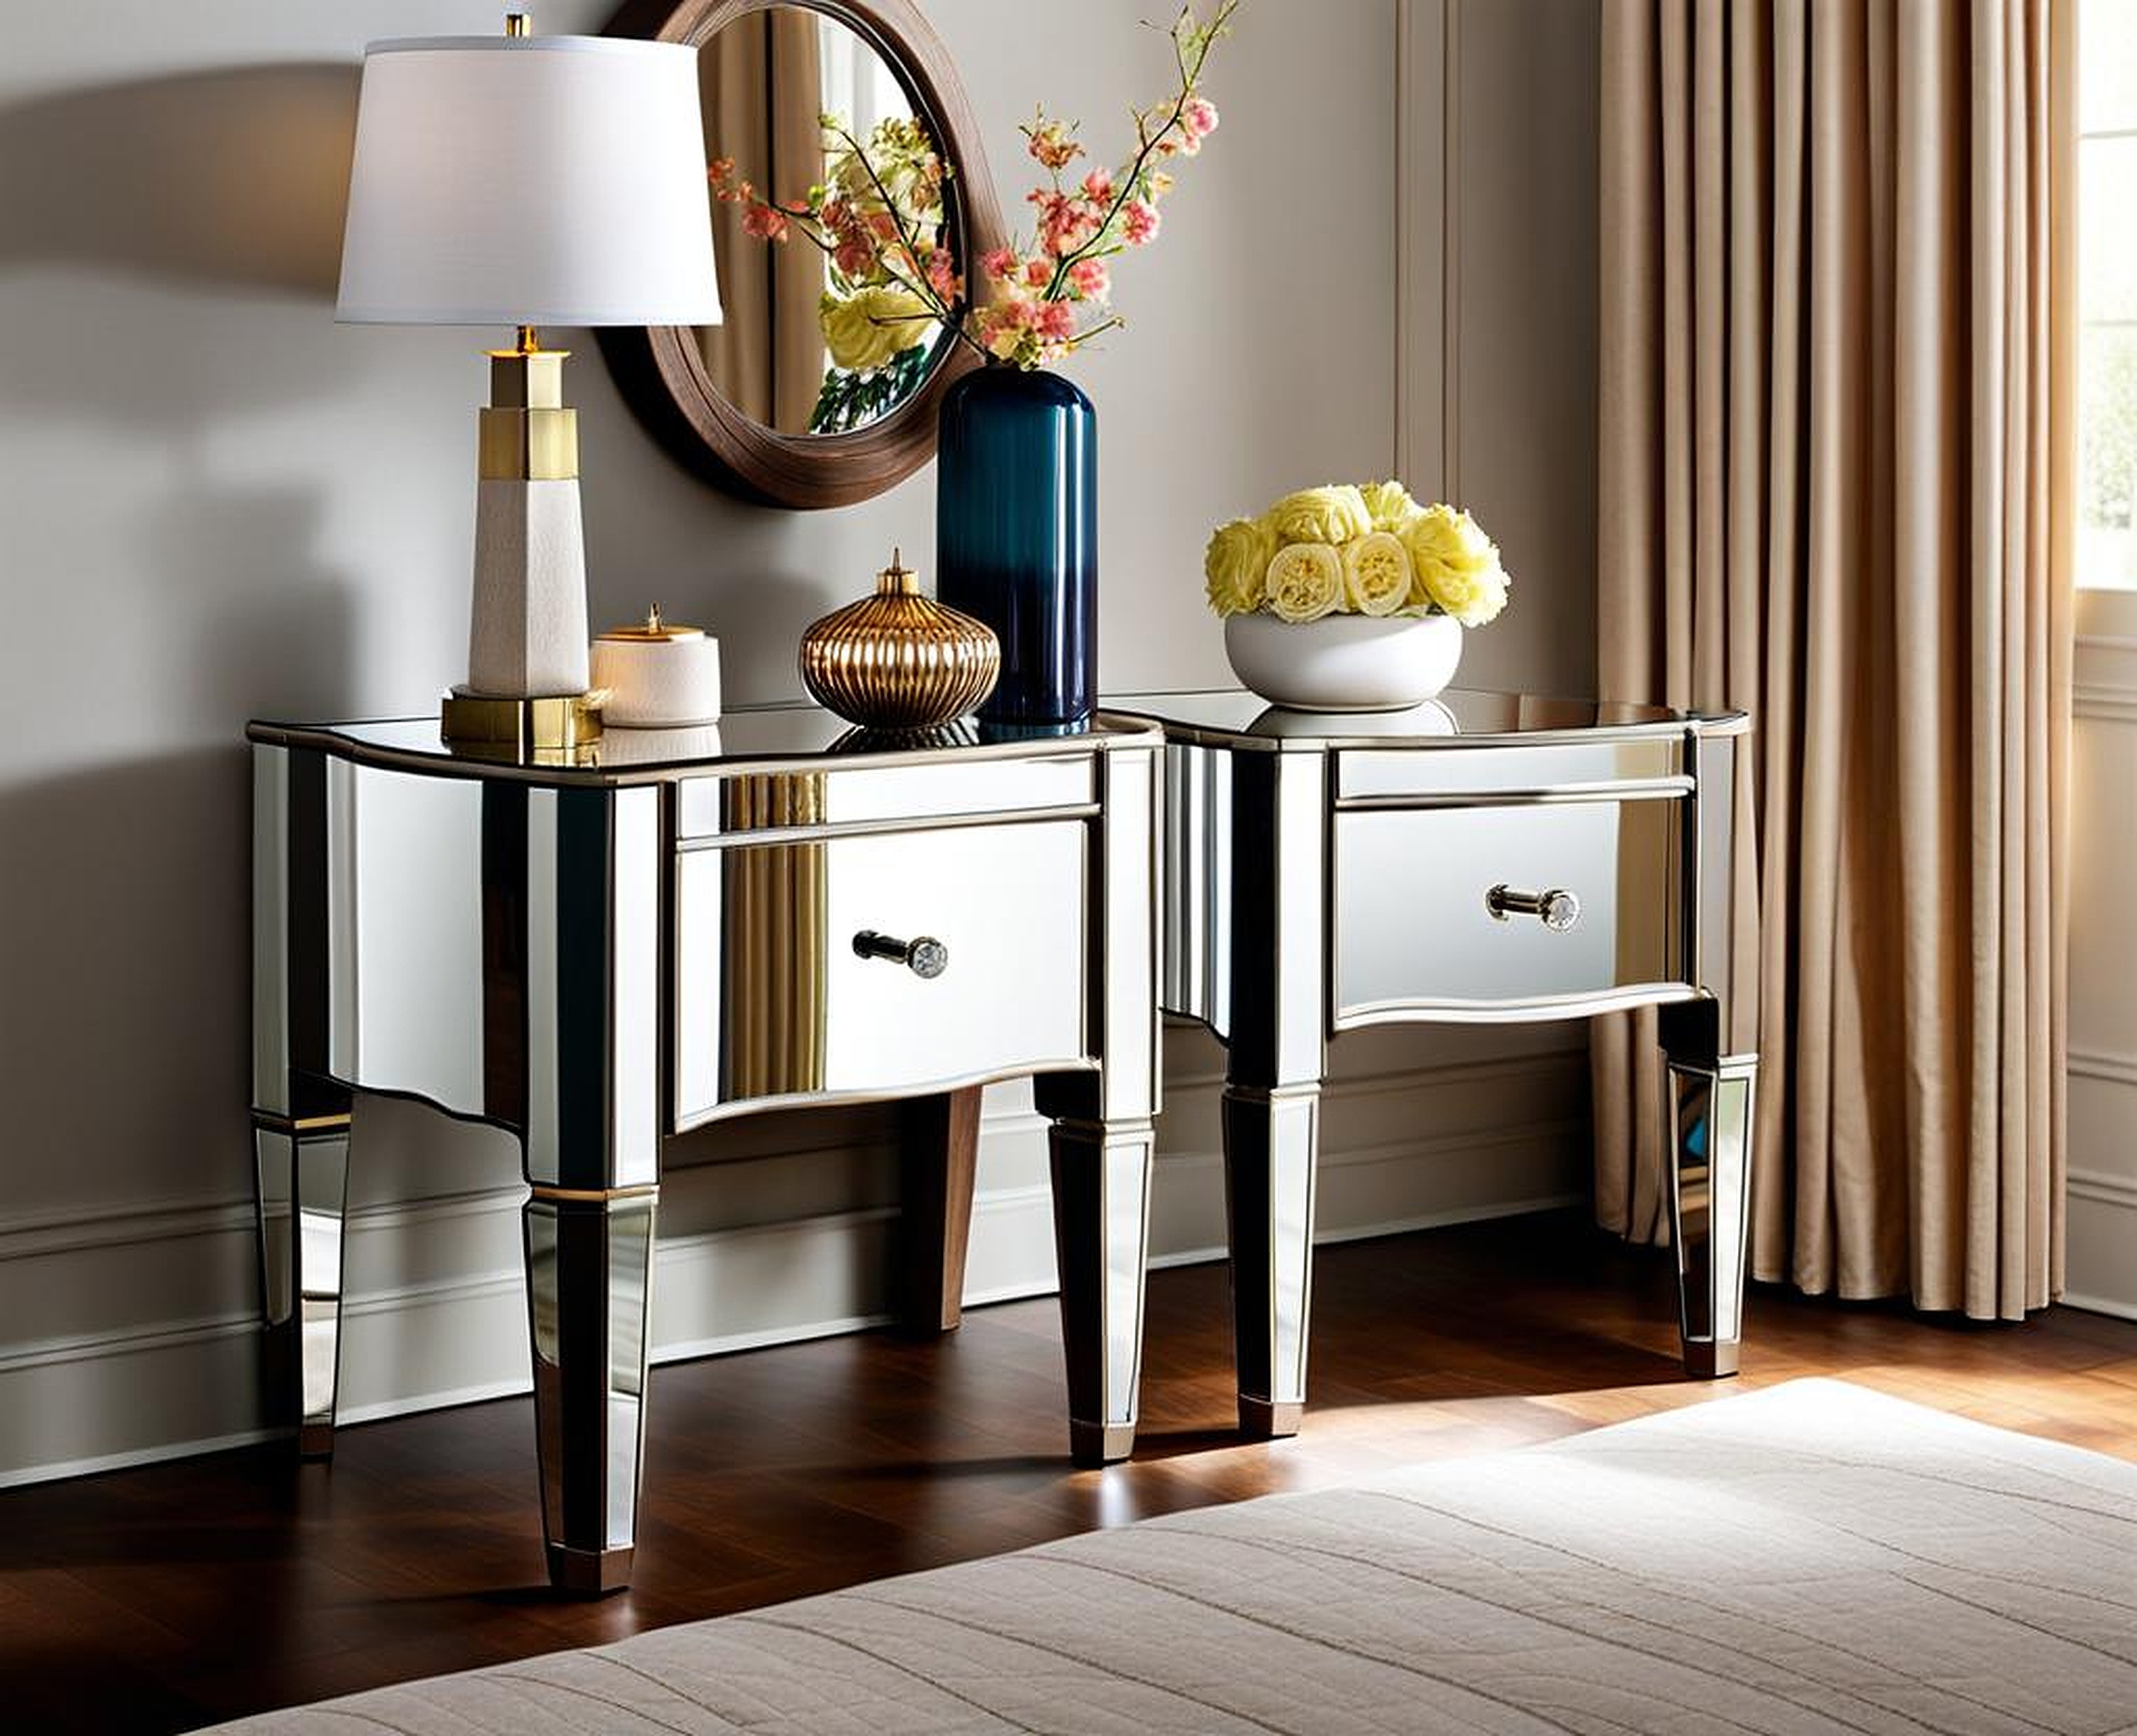 mirrored side tables for bedroom